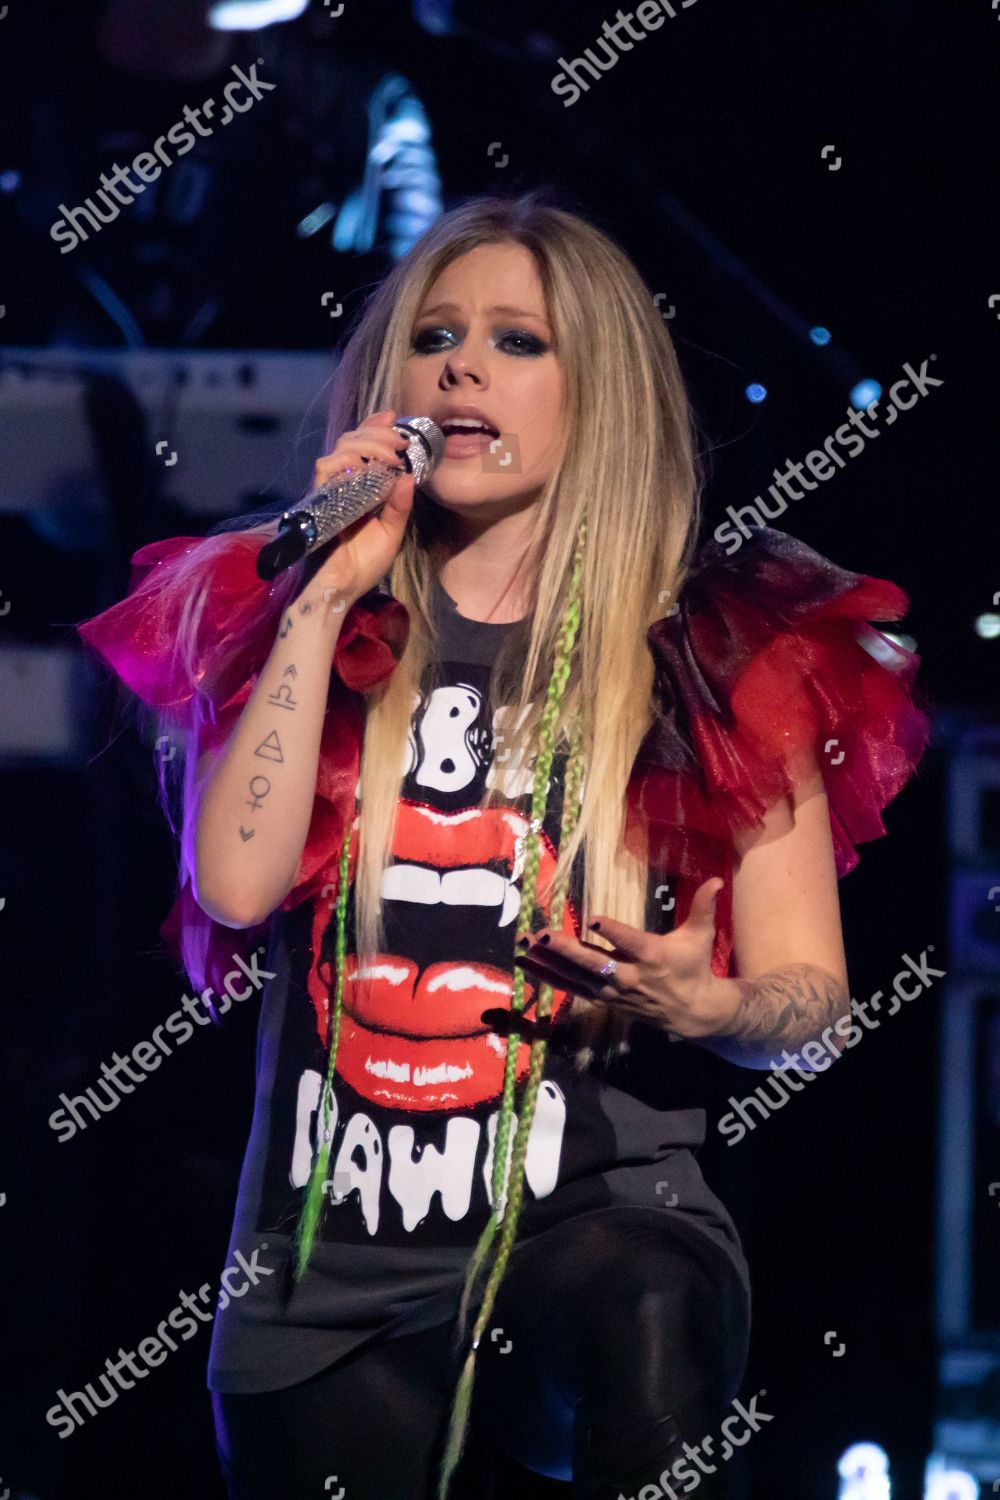 avril-lavigne-in-concert-at-the-fox-theatre-detroit-usa-shutterstock-editorial-10429786n.jpg